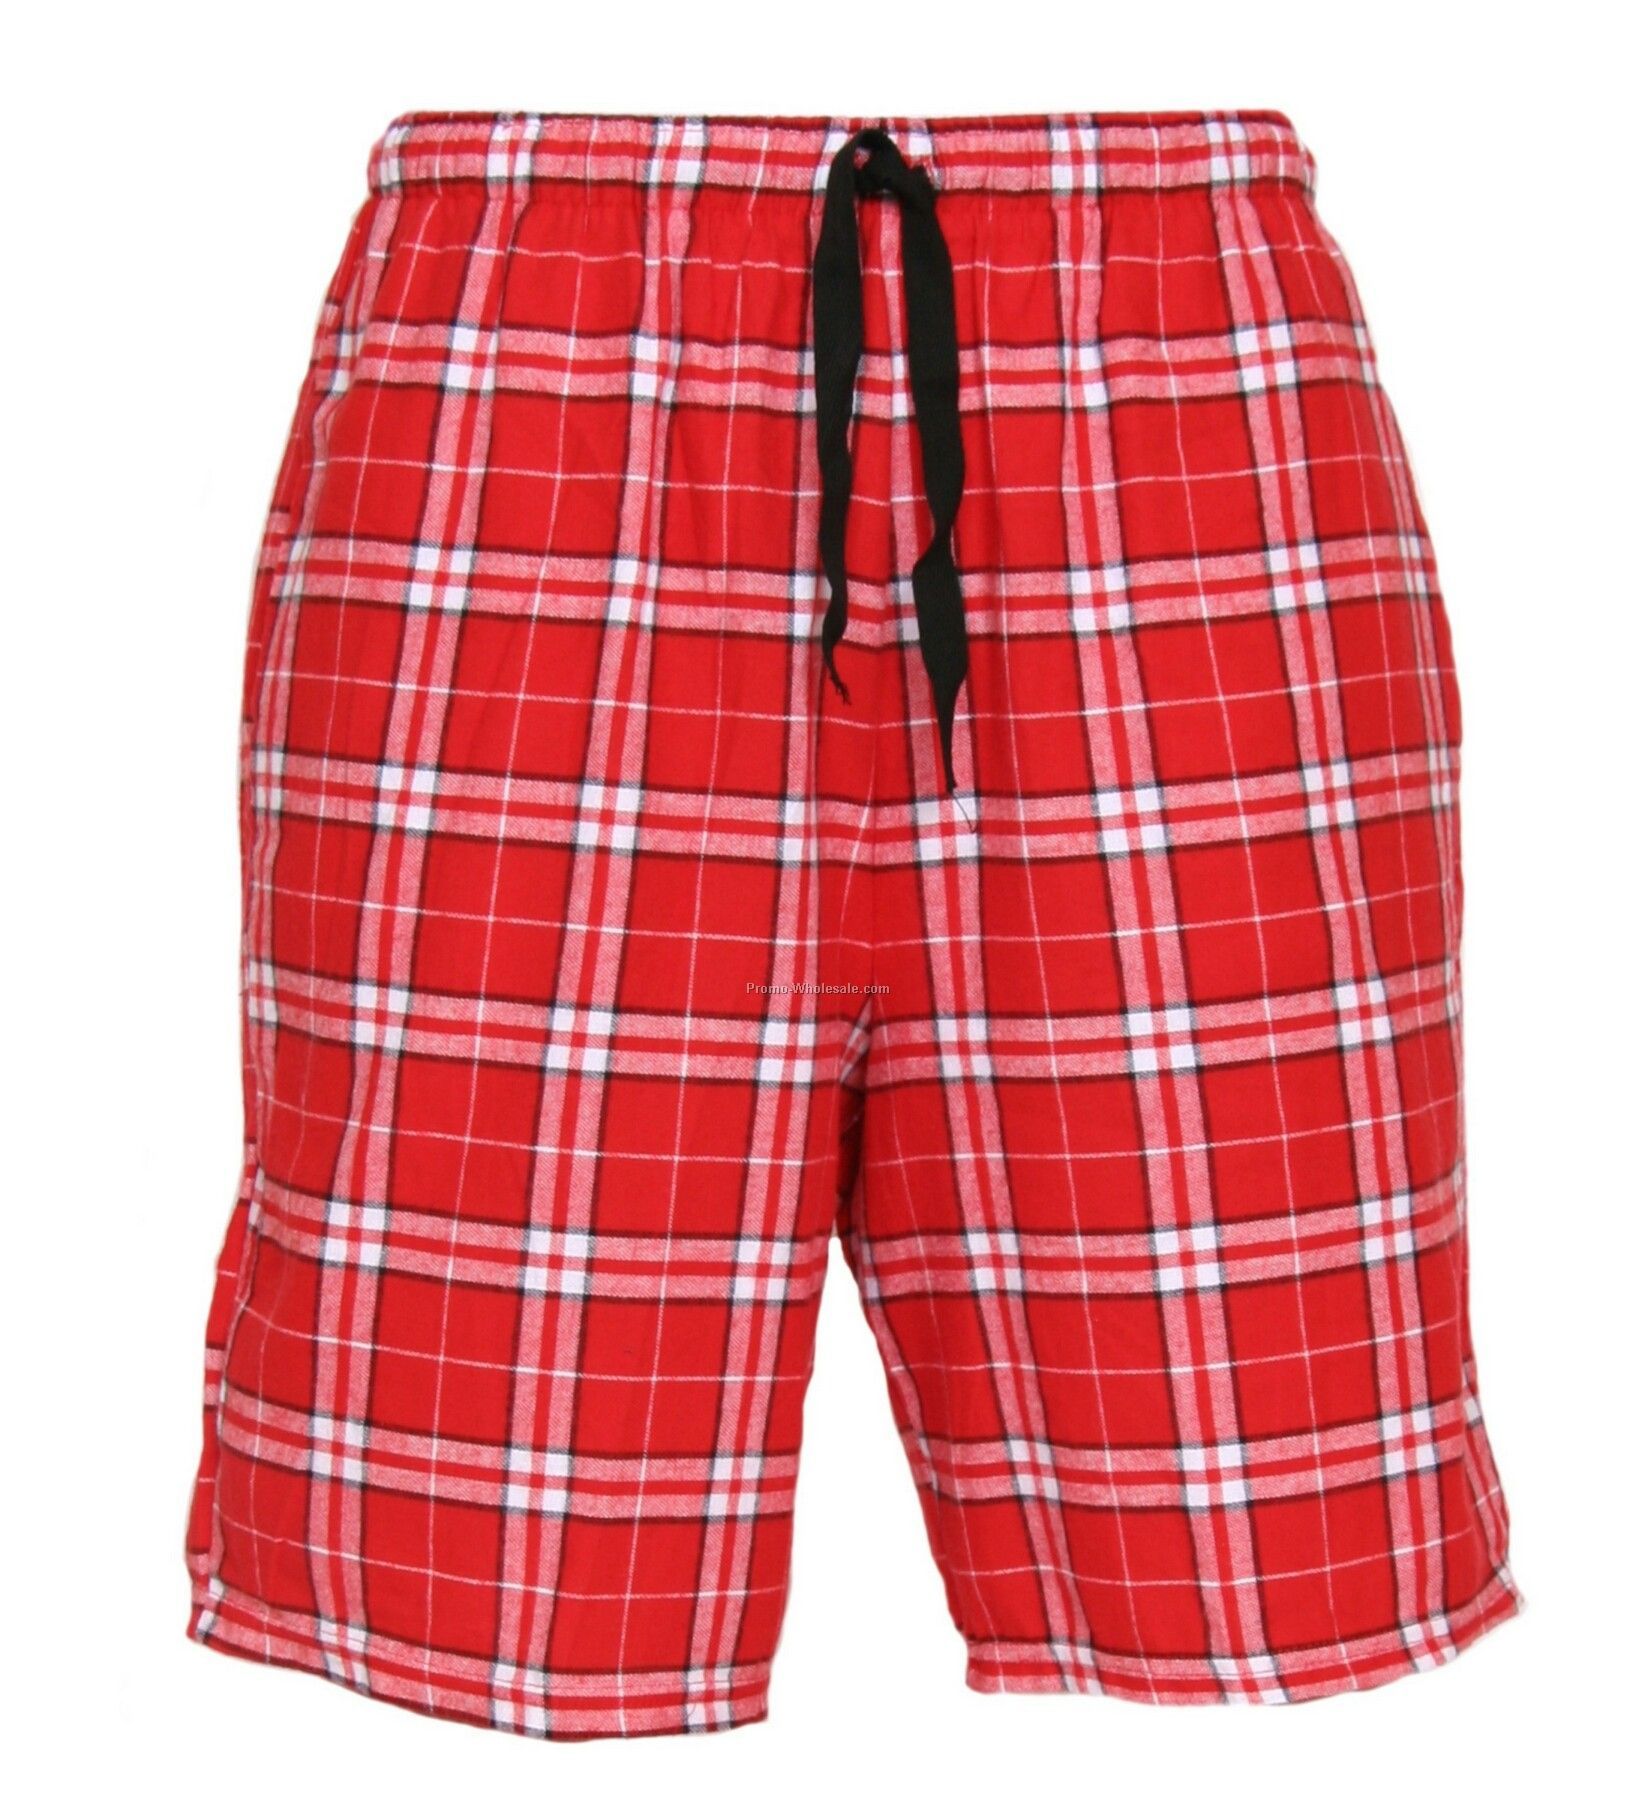 Adults' Red Flannel Dorm Shorts (S-xl)